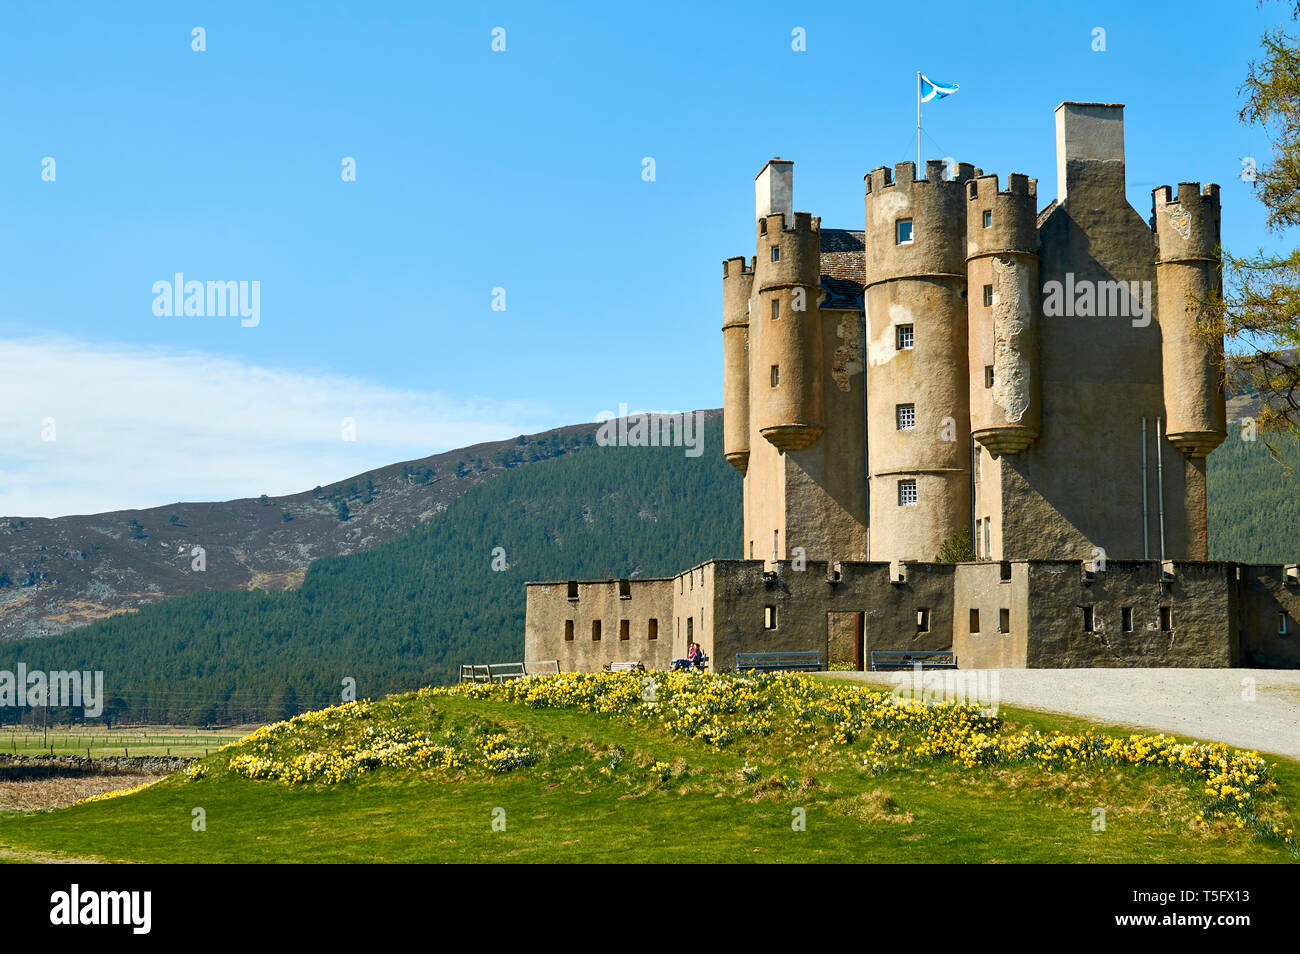 BRAEMAR ABERDEENSHIRE SCOTLAND BRAEMAR CASTLE WITH MOUNTAIN AND DAFFODILS IN SPRINGTIME Stock Photo